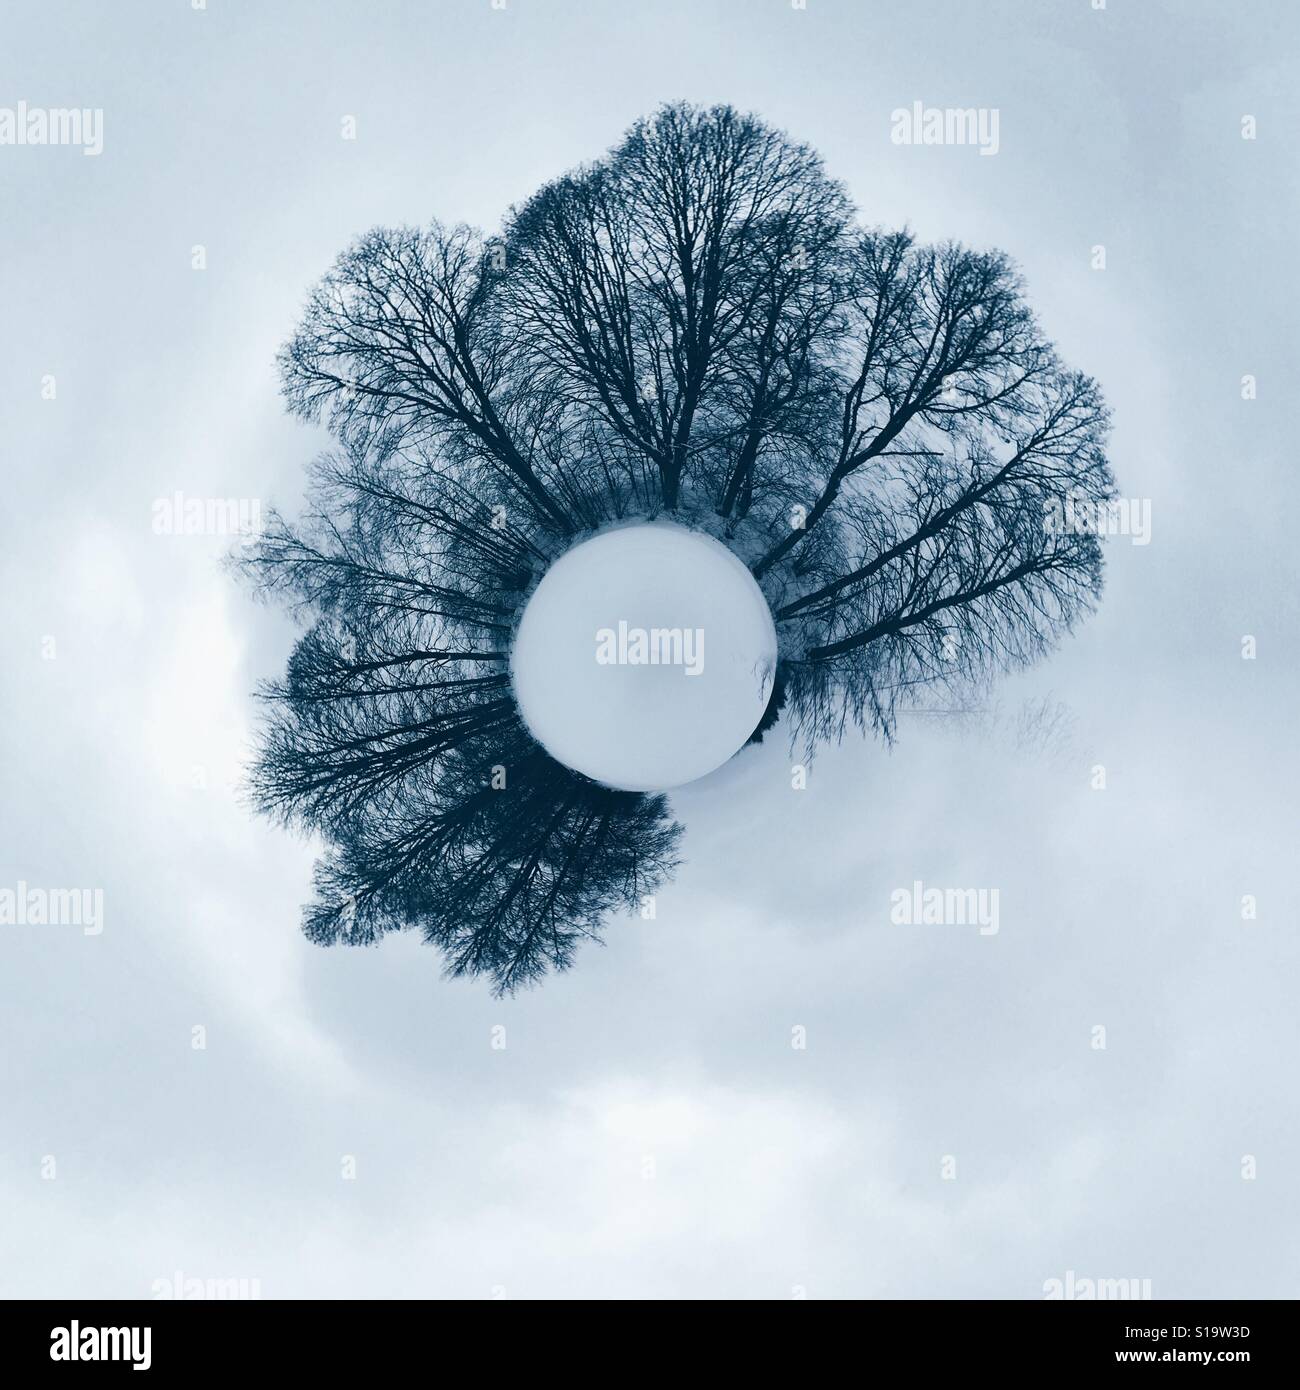 Forest in winter as tiny planet Stock Photo